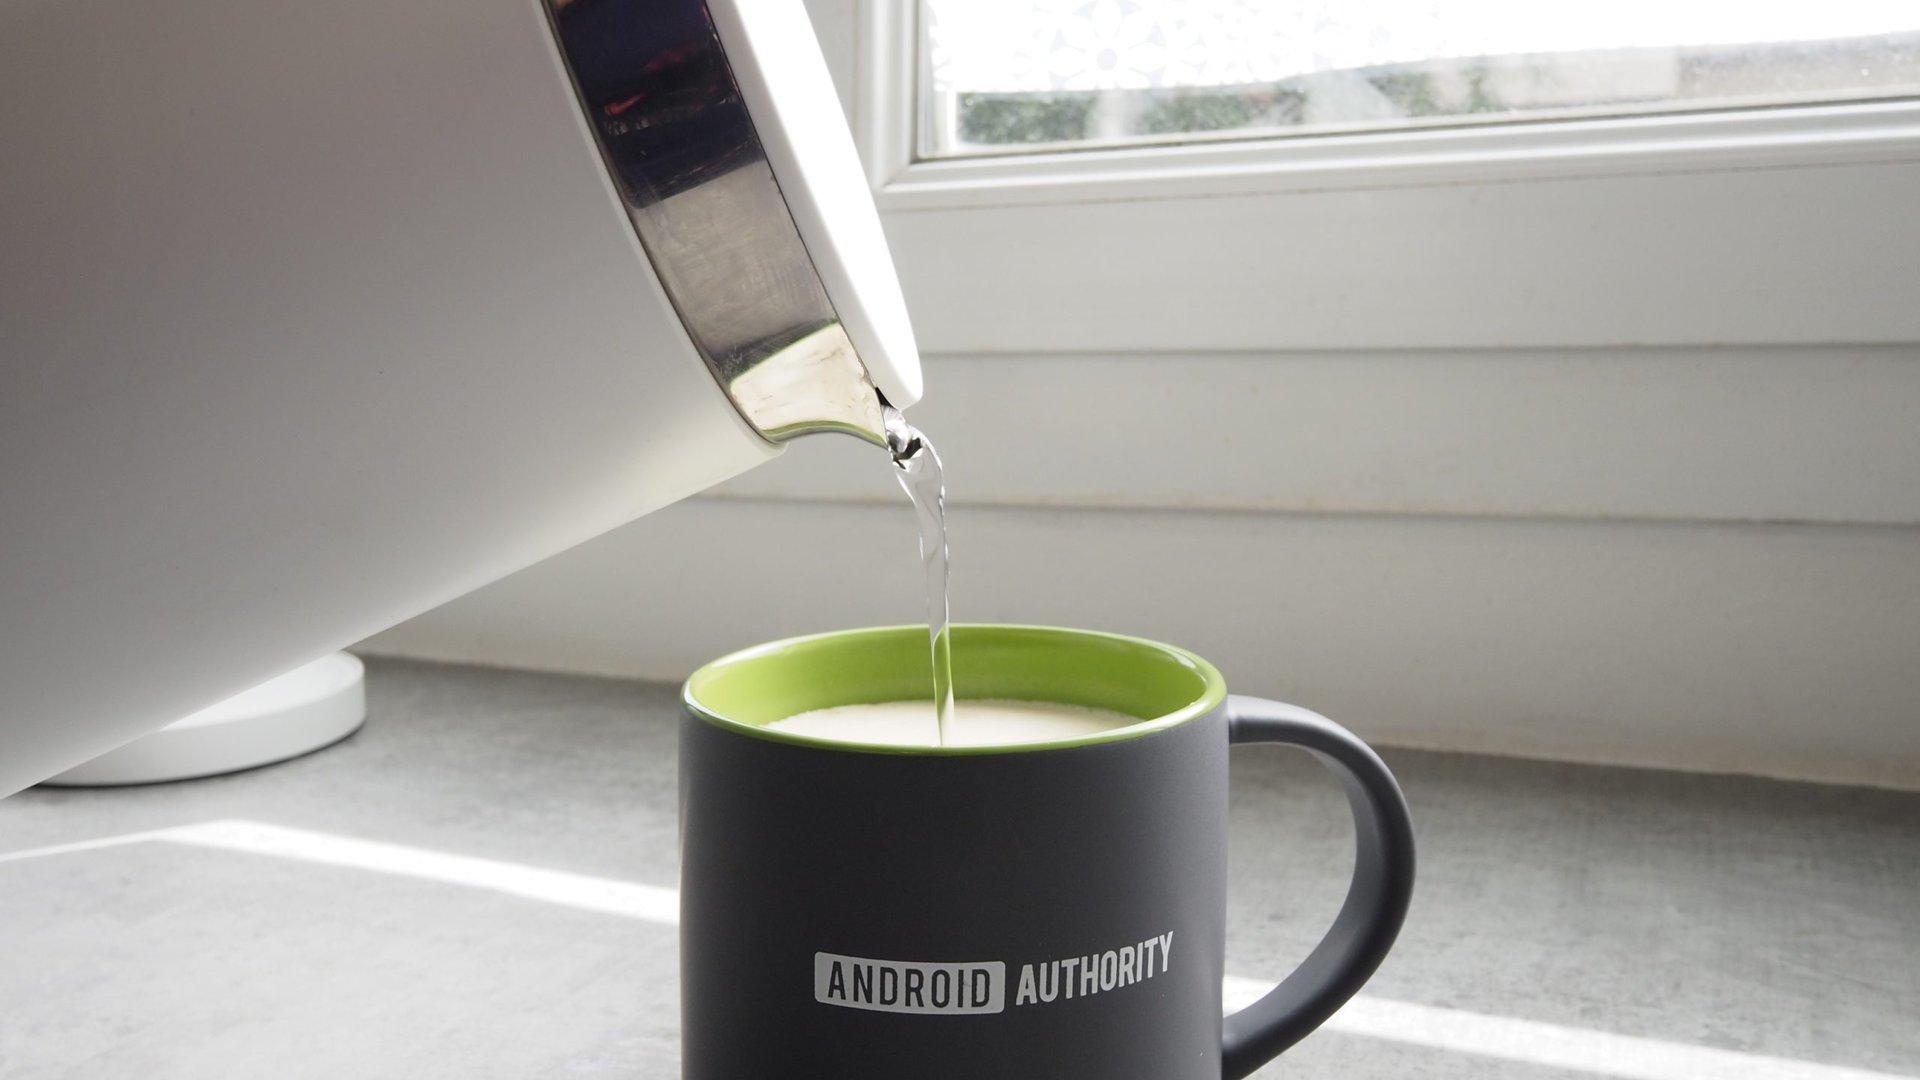 Xiaomi Mi Smart Kettle Pro pouring water into Android Authority mug